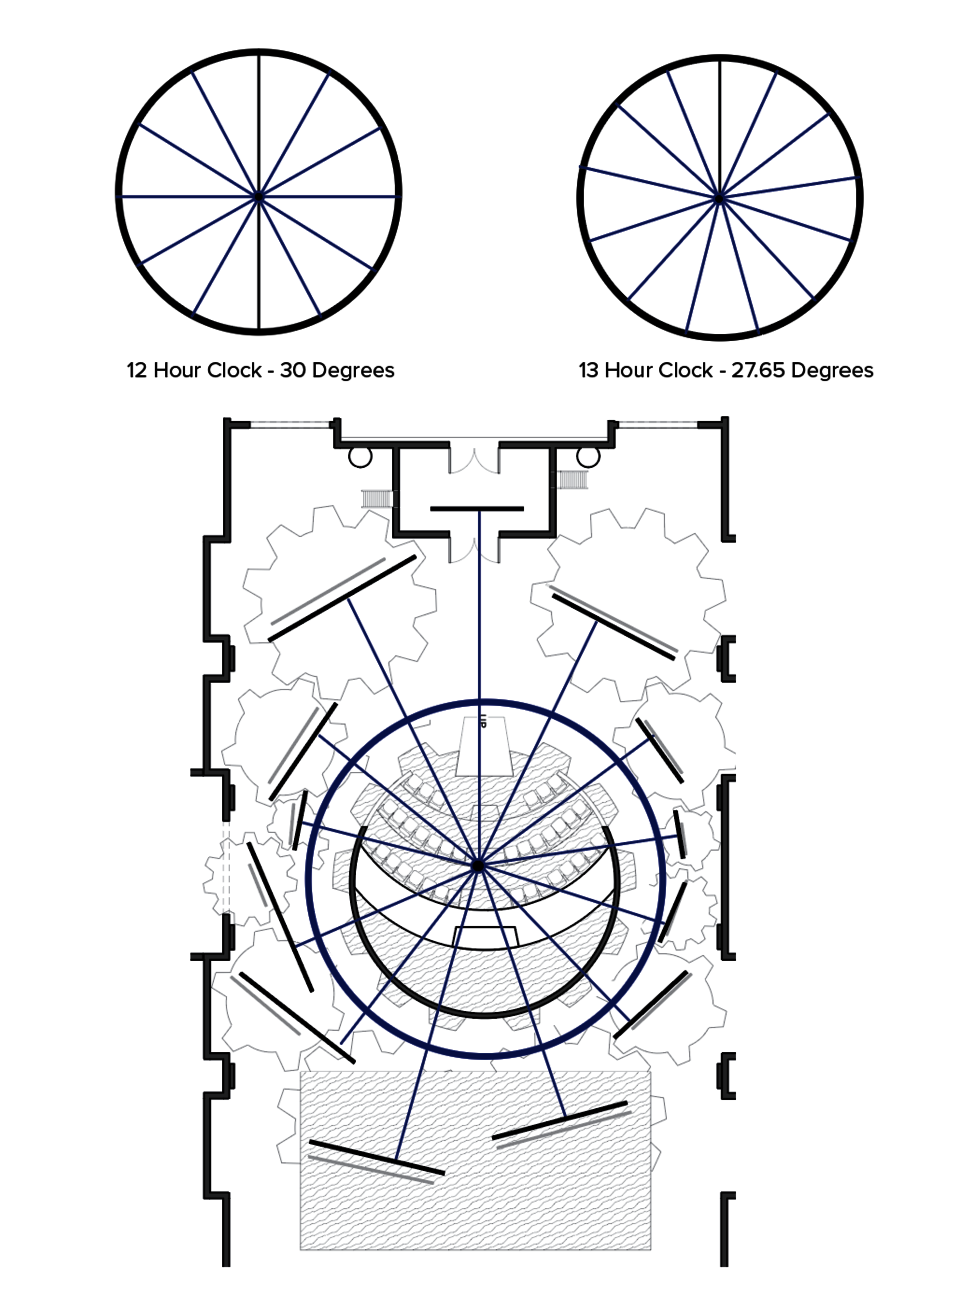 Diagrams explaining the difference between a 12 hour and 13 hour clock, and how that affected the placement of the scrim walls